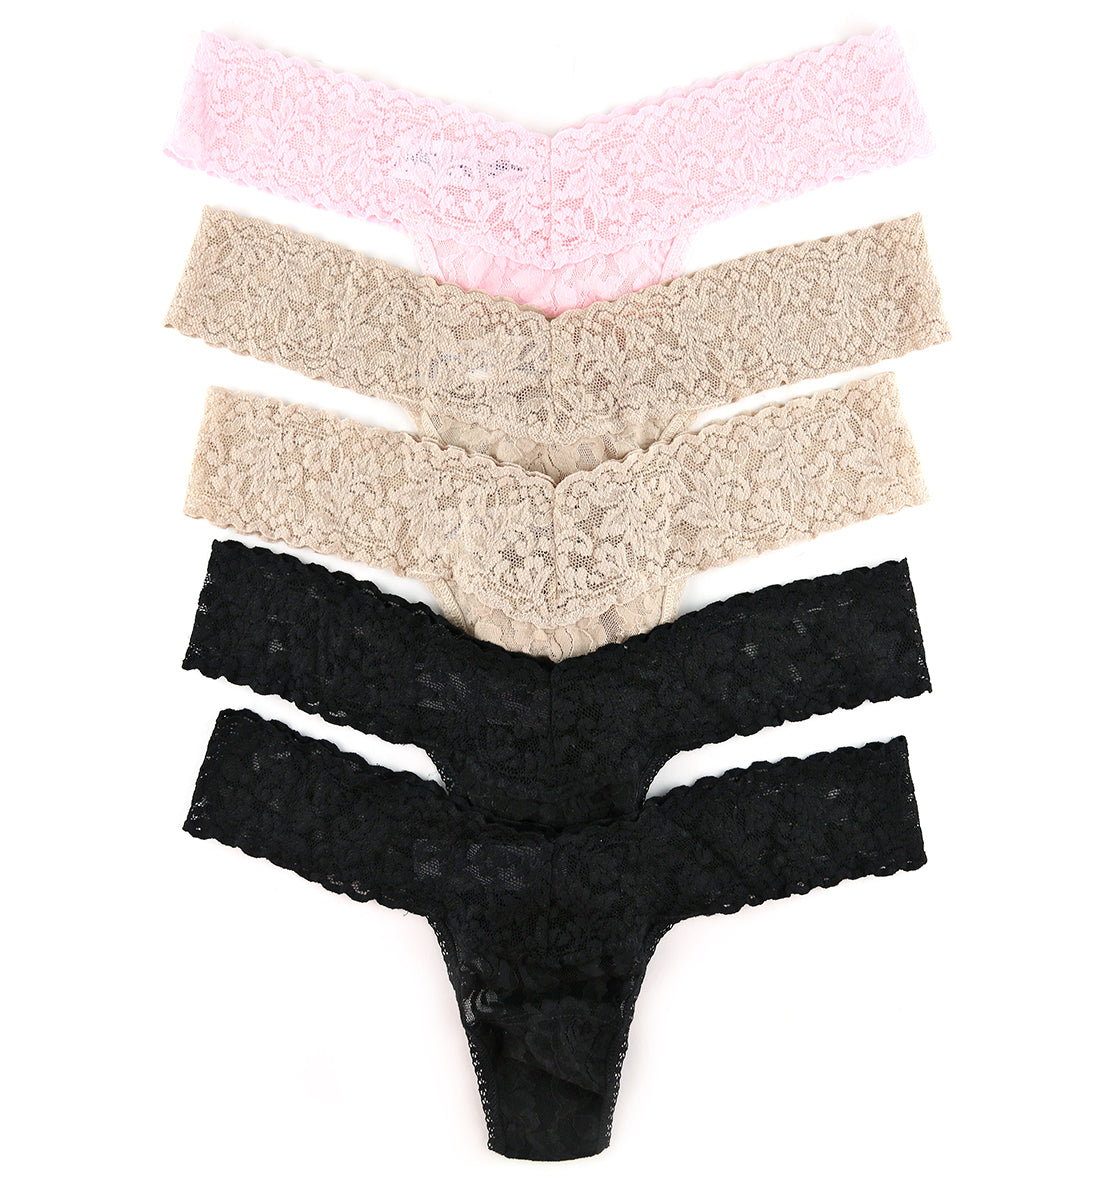 Hanky Panky 5-PACK Signature Lace Low Rise Thong (49115PK),Black/Chai/Bliss - Black/Chai/Bliss,One Size